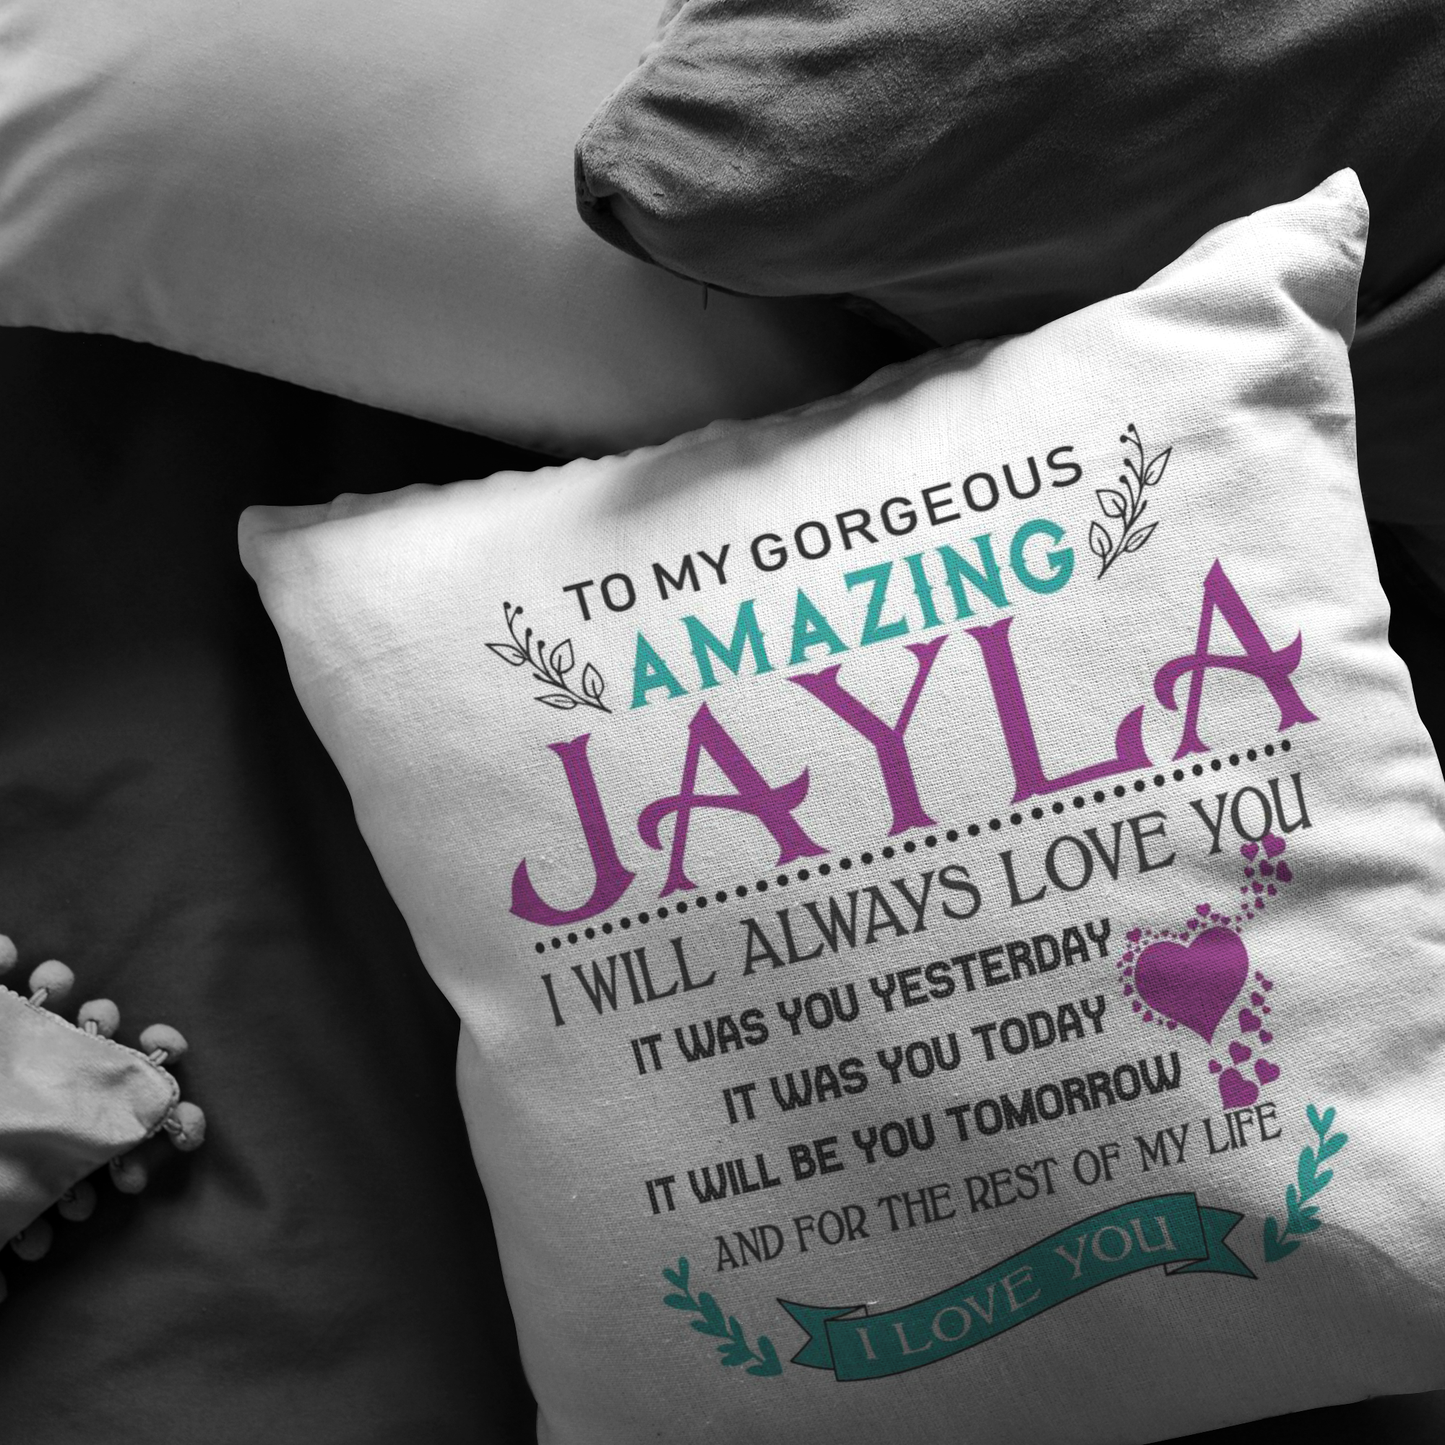 P-20415613-sp-30319 - [ Jayla | 1 ] (PI_ThrowPillowCovers) FamilyGift for Her - to My Gorgeus Amazing Jayla I Will Alwa